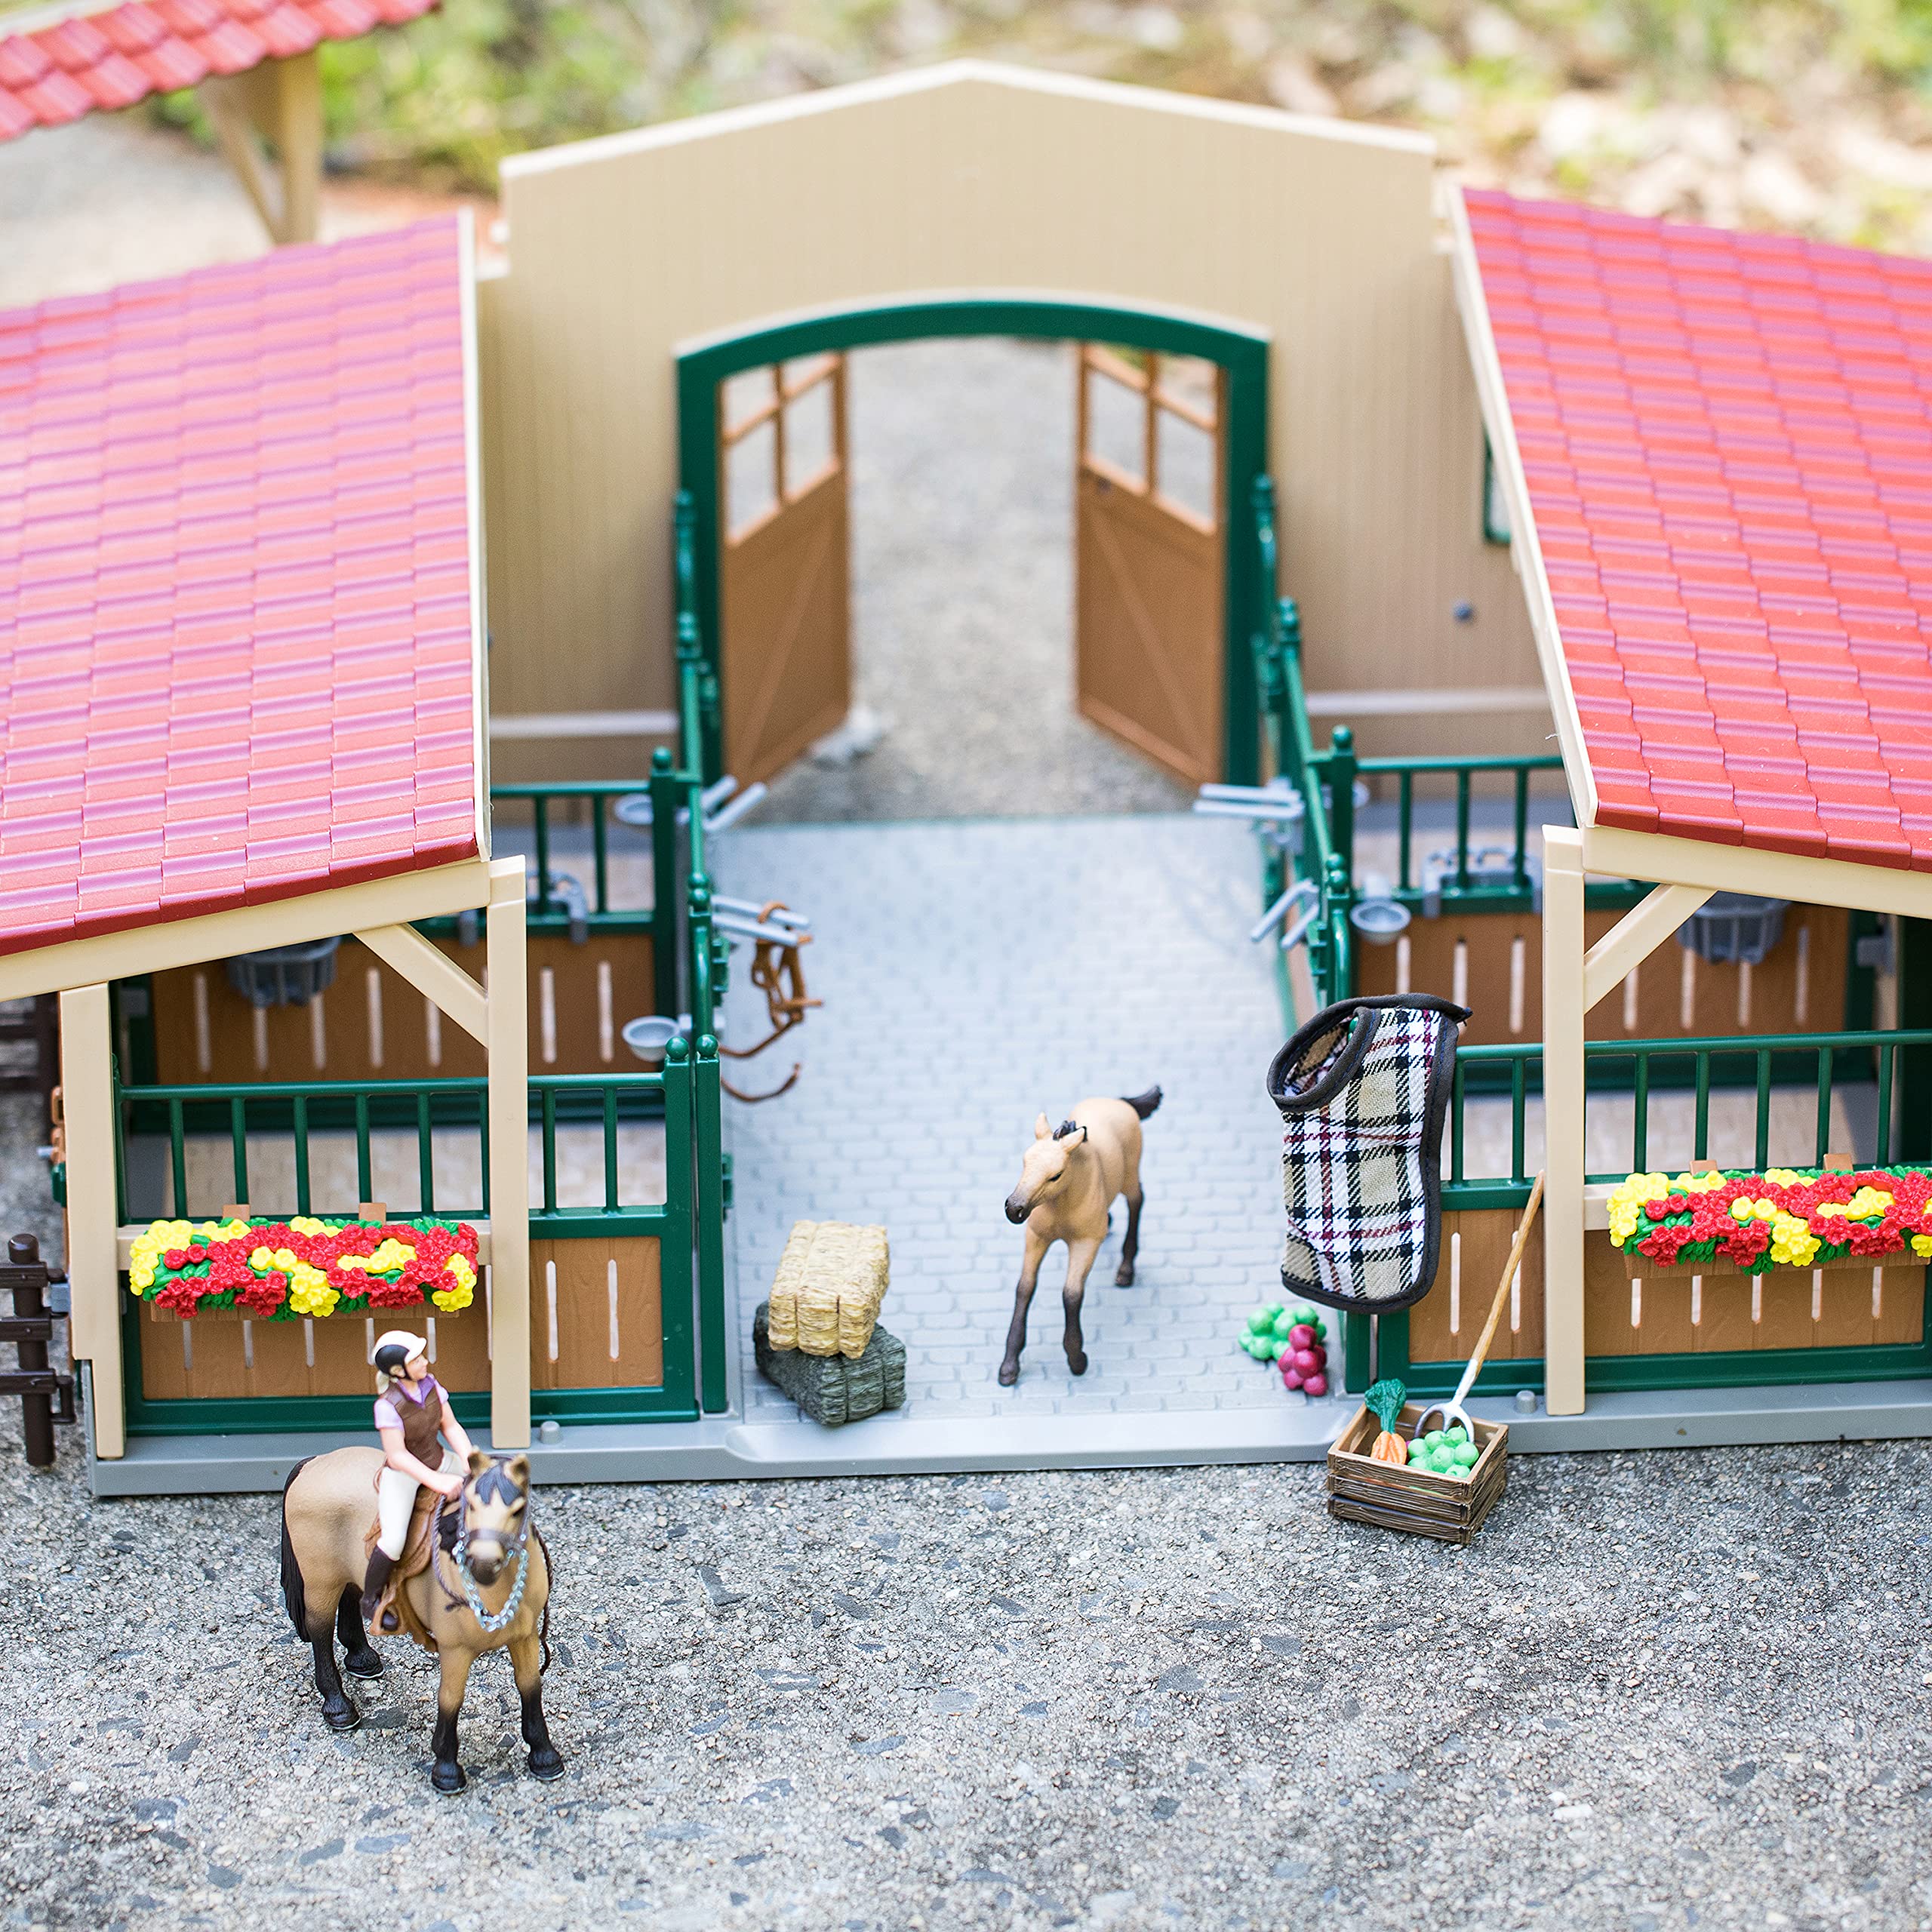 Schleich Horse Barn and Stable Playset - Award-Winning Riding Center 96 Piece Set, 2 Pony Toys, Rider Figurine, and Farm Accessories, for Girls and Boys 3 Years Old and Above